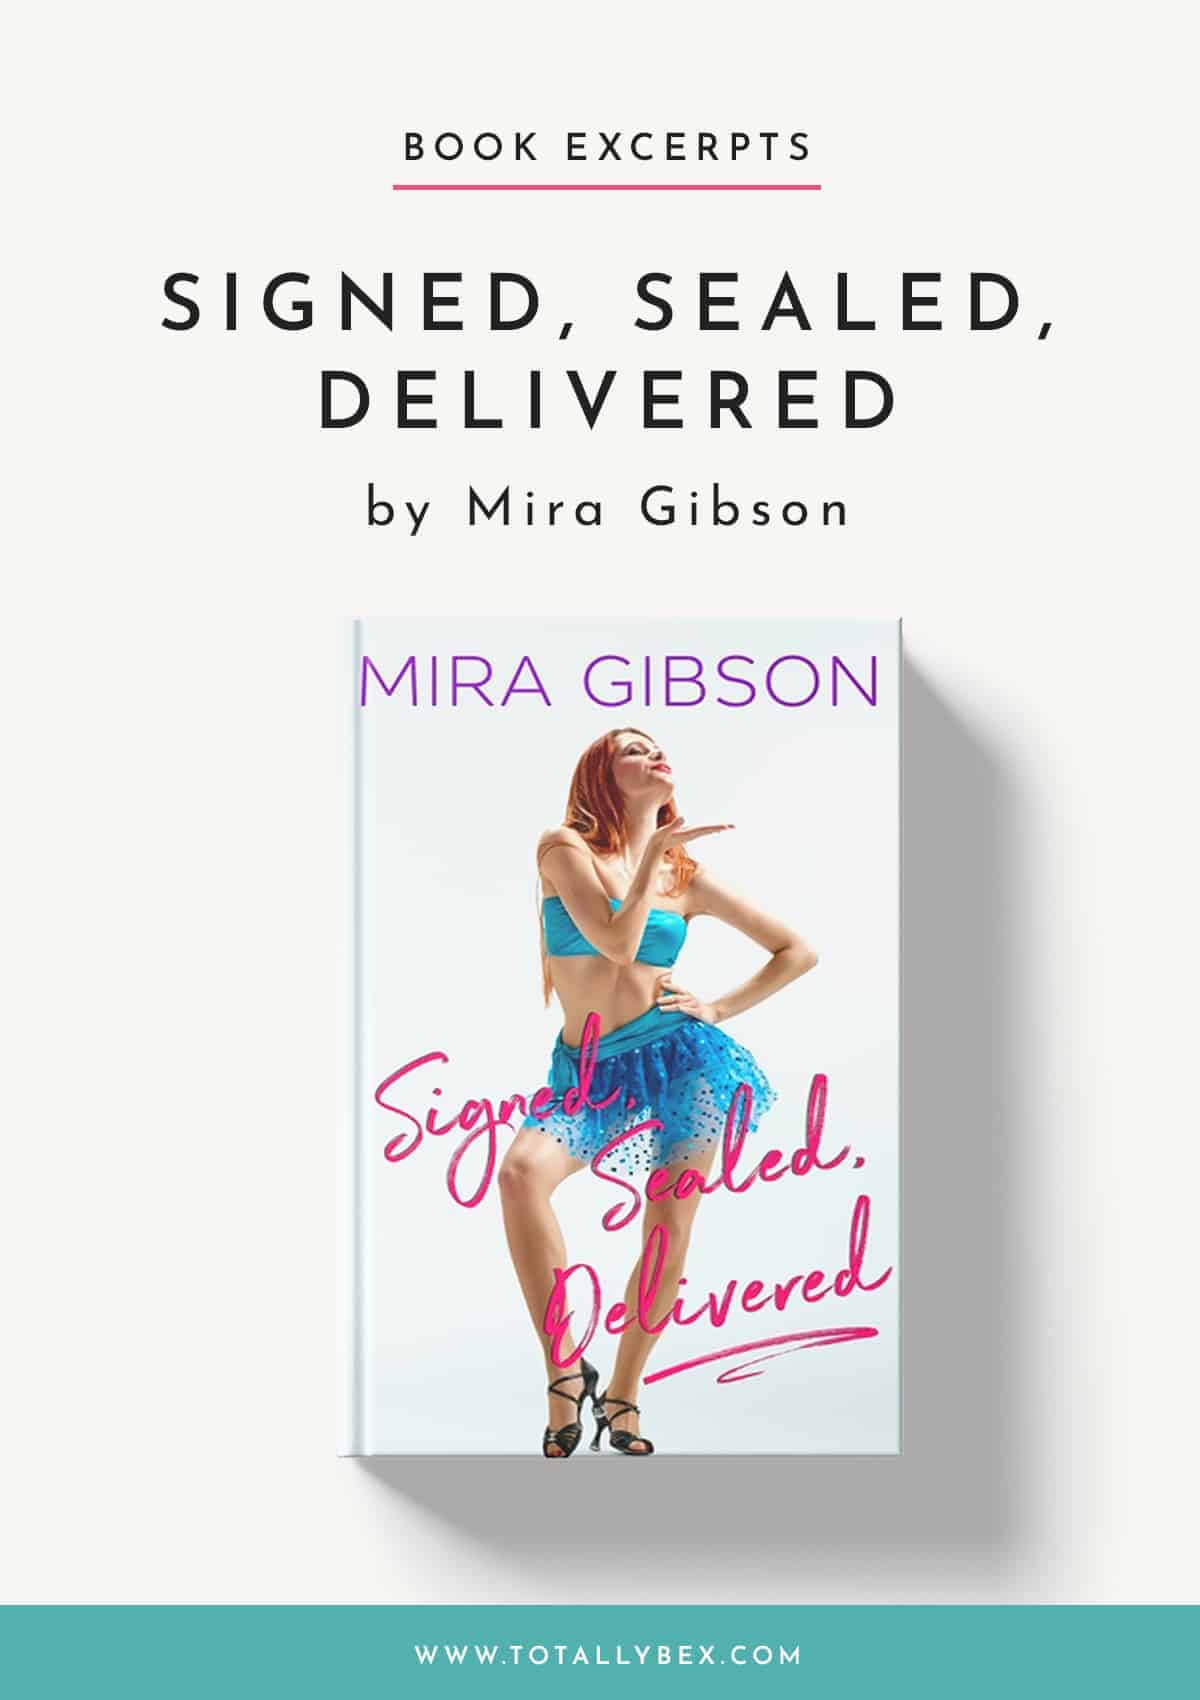 Signed Sealed Delivered by Mira Gibson-Excerpt